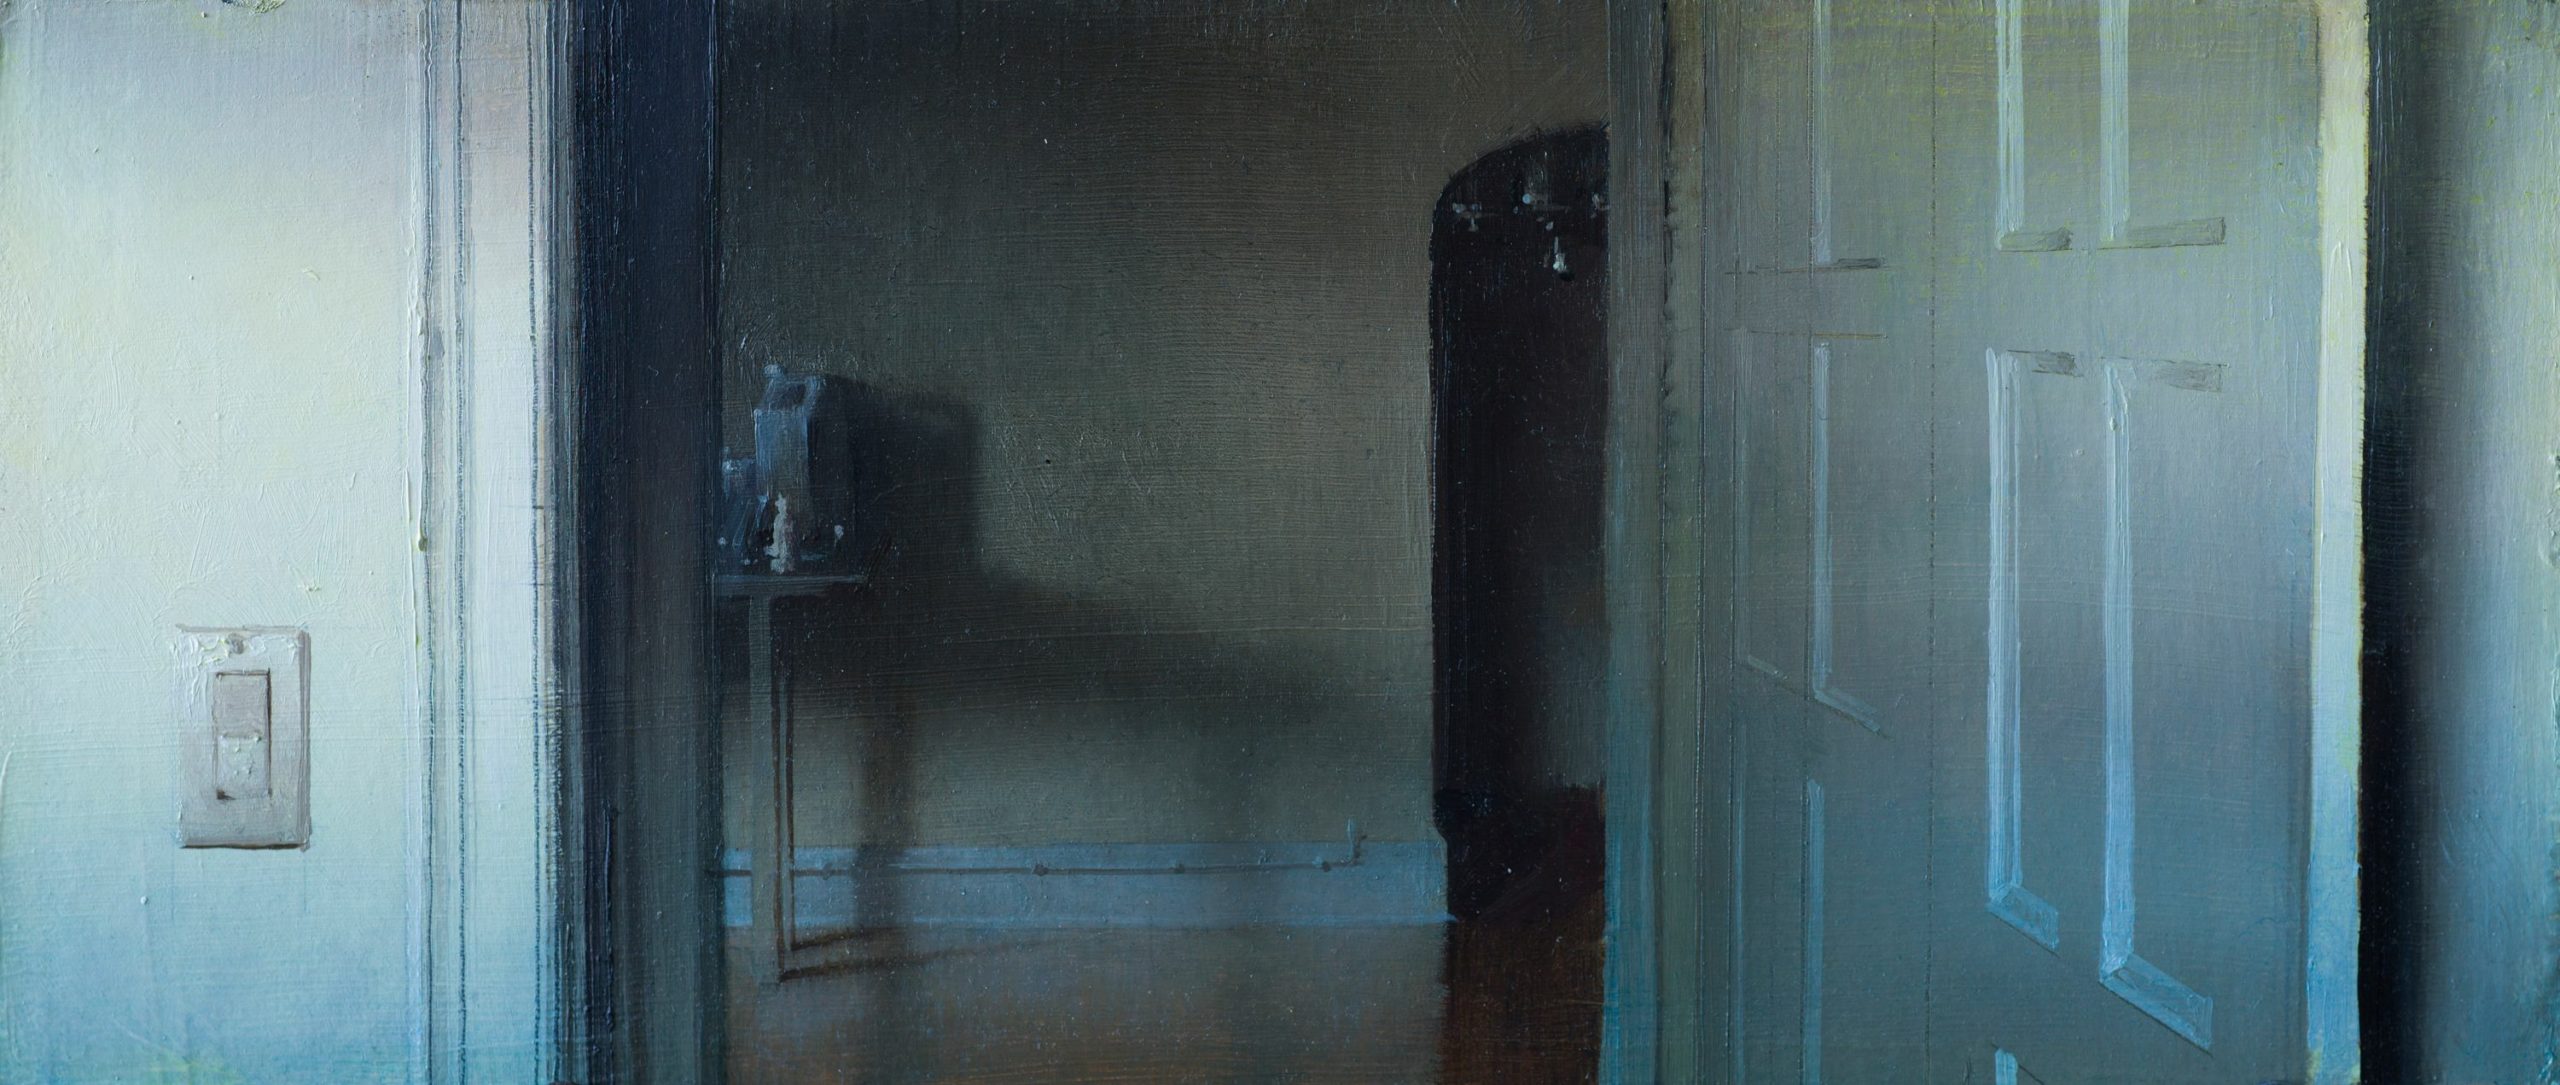 

											Daniel Sprick</b>

											<em>
												My Interior Life</em> 

											<h4>
												New York: February 11 - March 16											</h4>

		                																																													<i>The Doors,</i>  
																																								2017, 
																																								oil on board, 
																																								6 x 14.5 inches 
																								
		                				